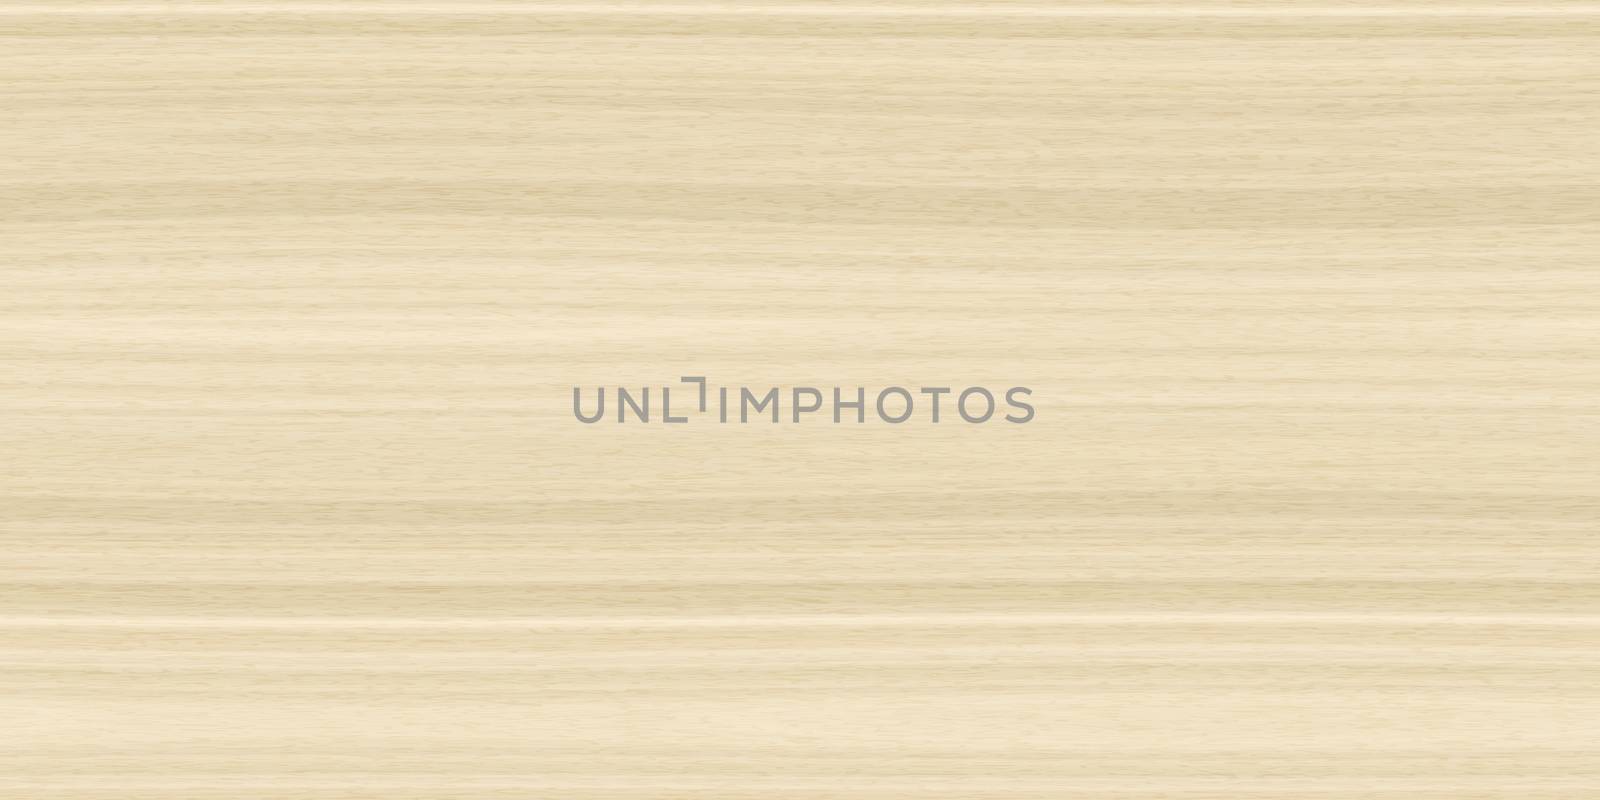 Maple wood surface seamless texture. Wooden maple board panel background.Maple wood surface seamless texture. Maple wooden board panel background. Horizontal along tree fibers direction.